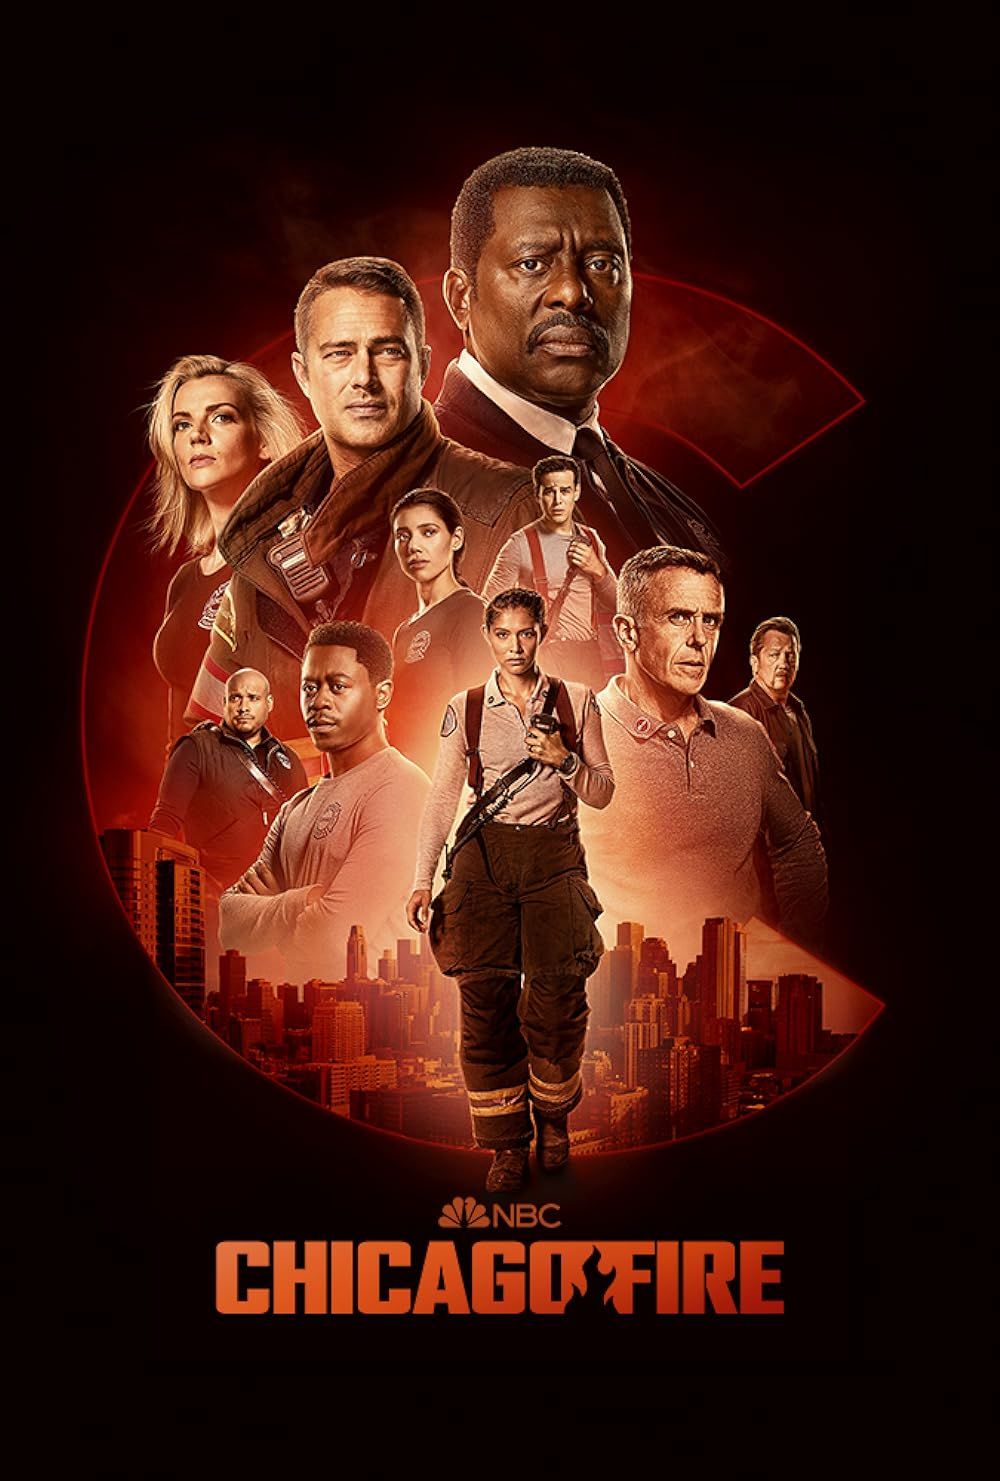 Poster of Chicago Fire with the main characters against the logo